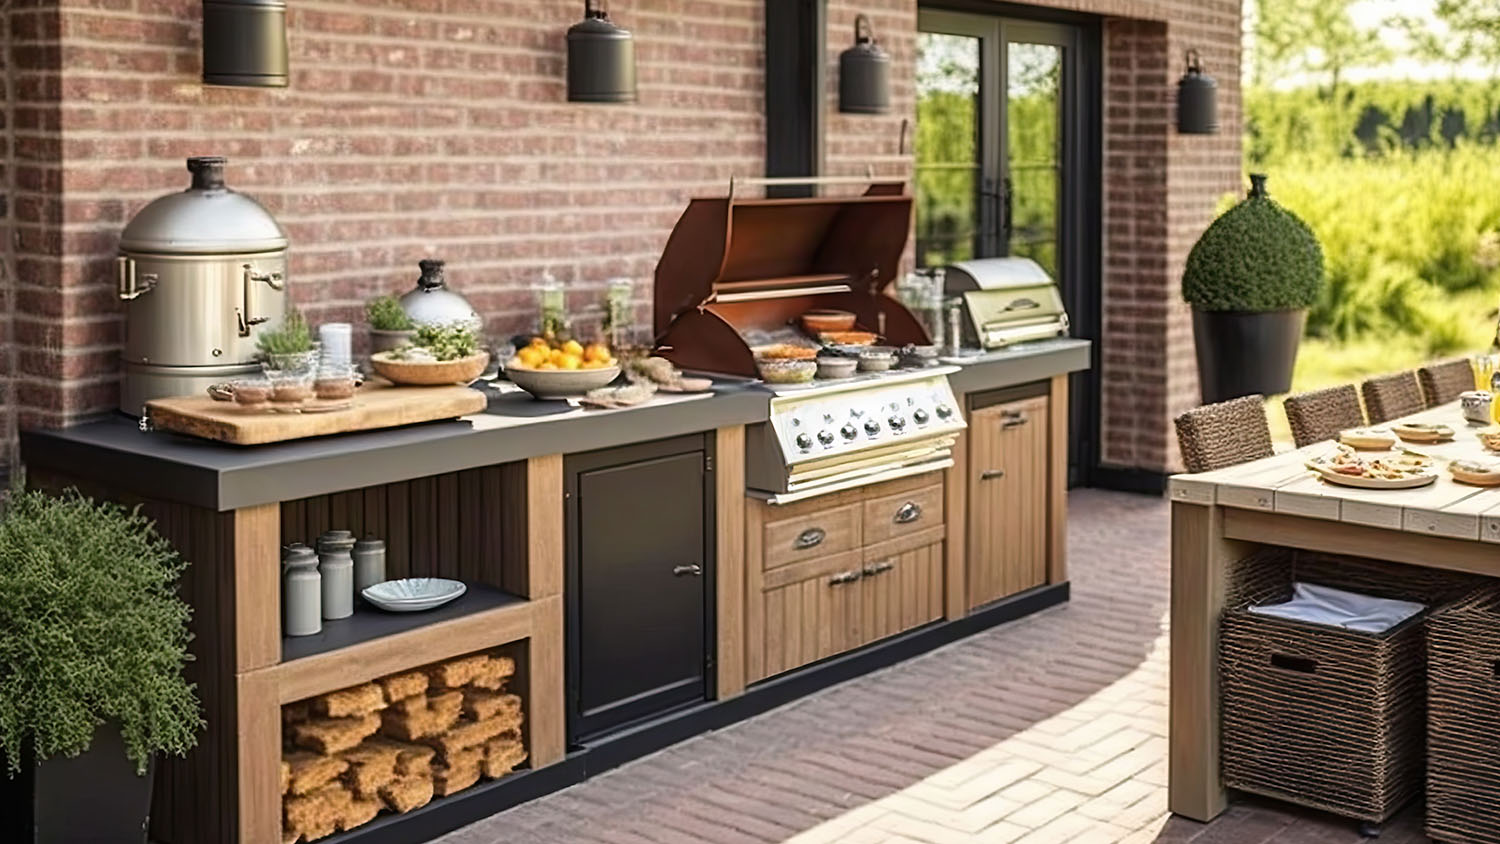 An outdoor kitchen in the backyard of a house